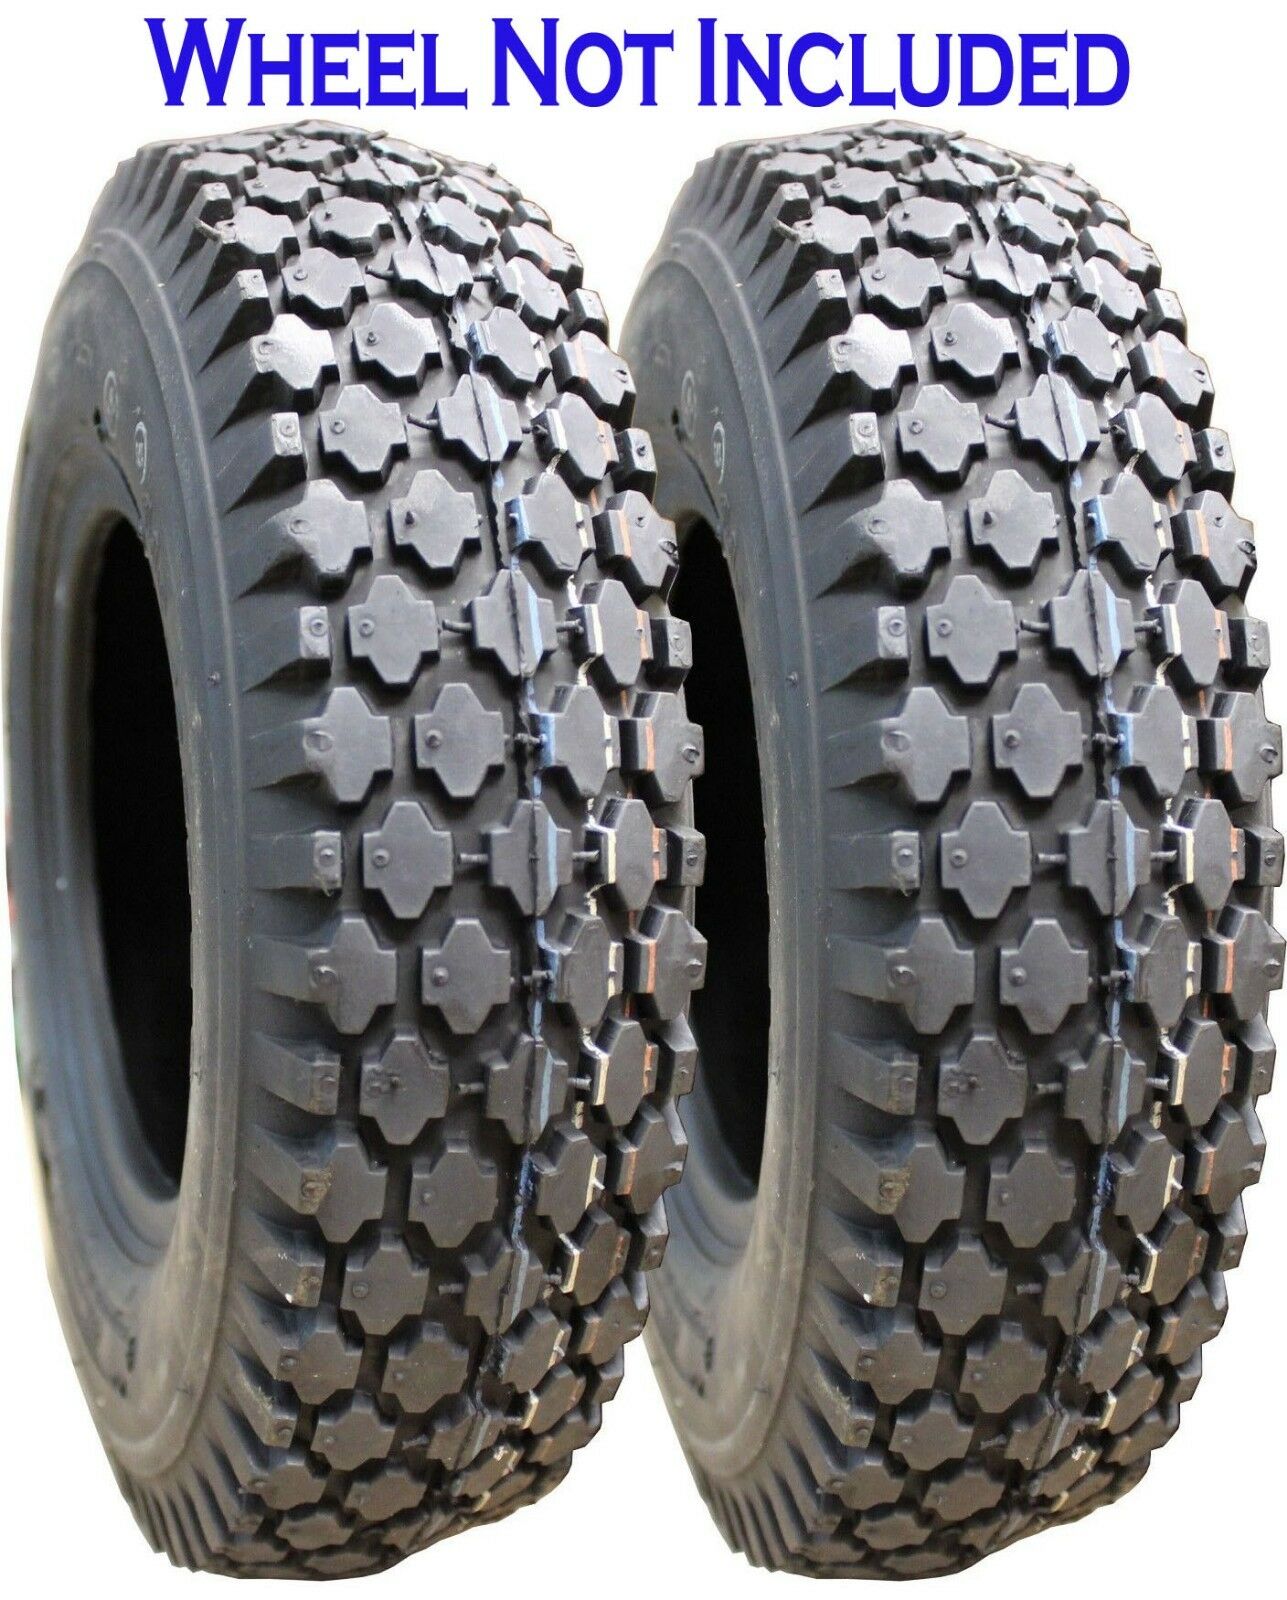 Greenball Stud S356 Transmaster Utility Tire 4ply 4.10/3.50-4 - Pack of 2